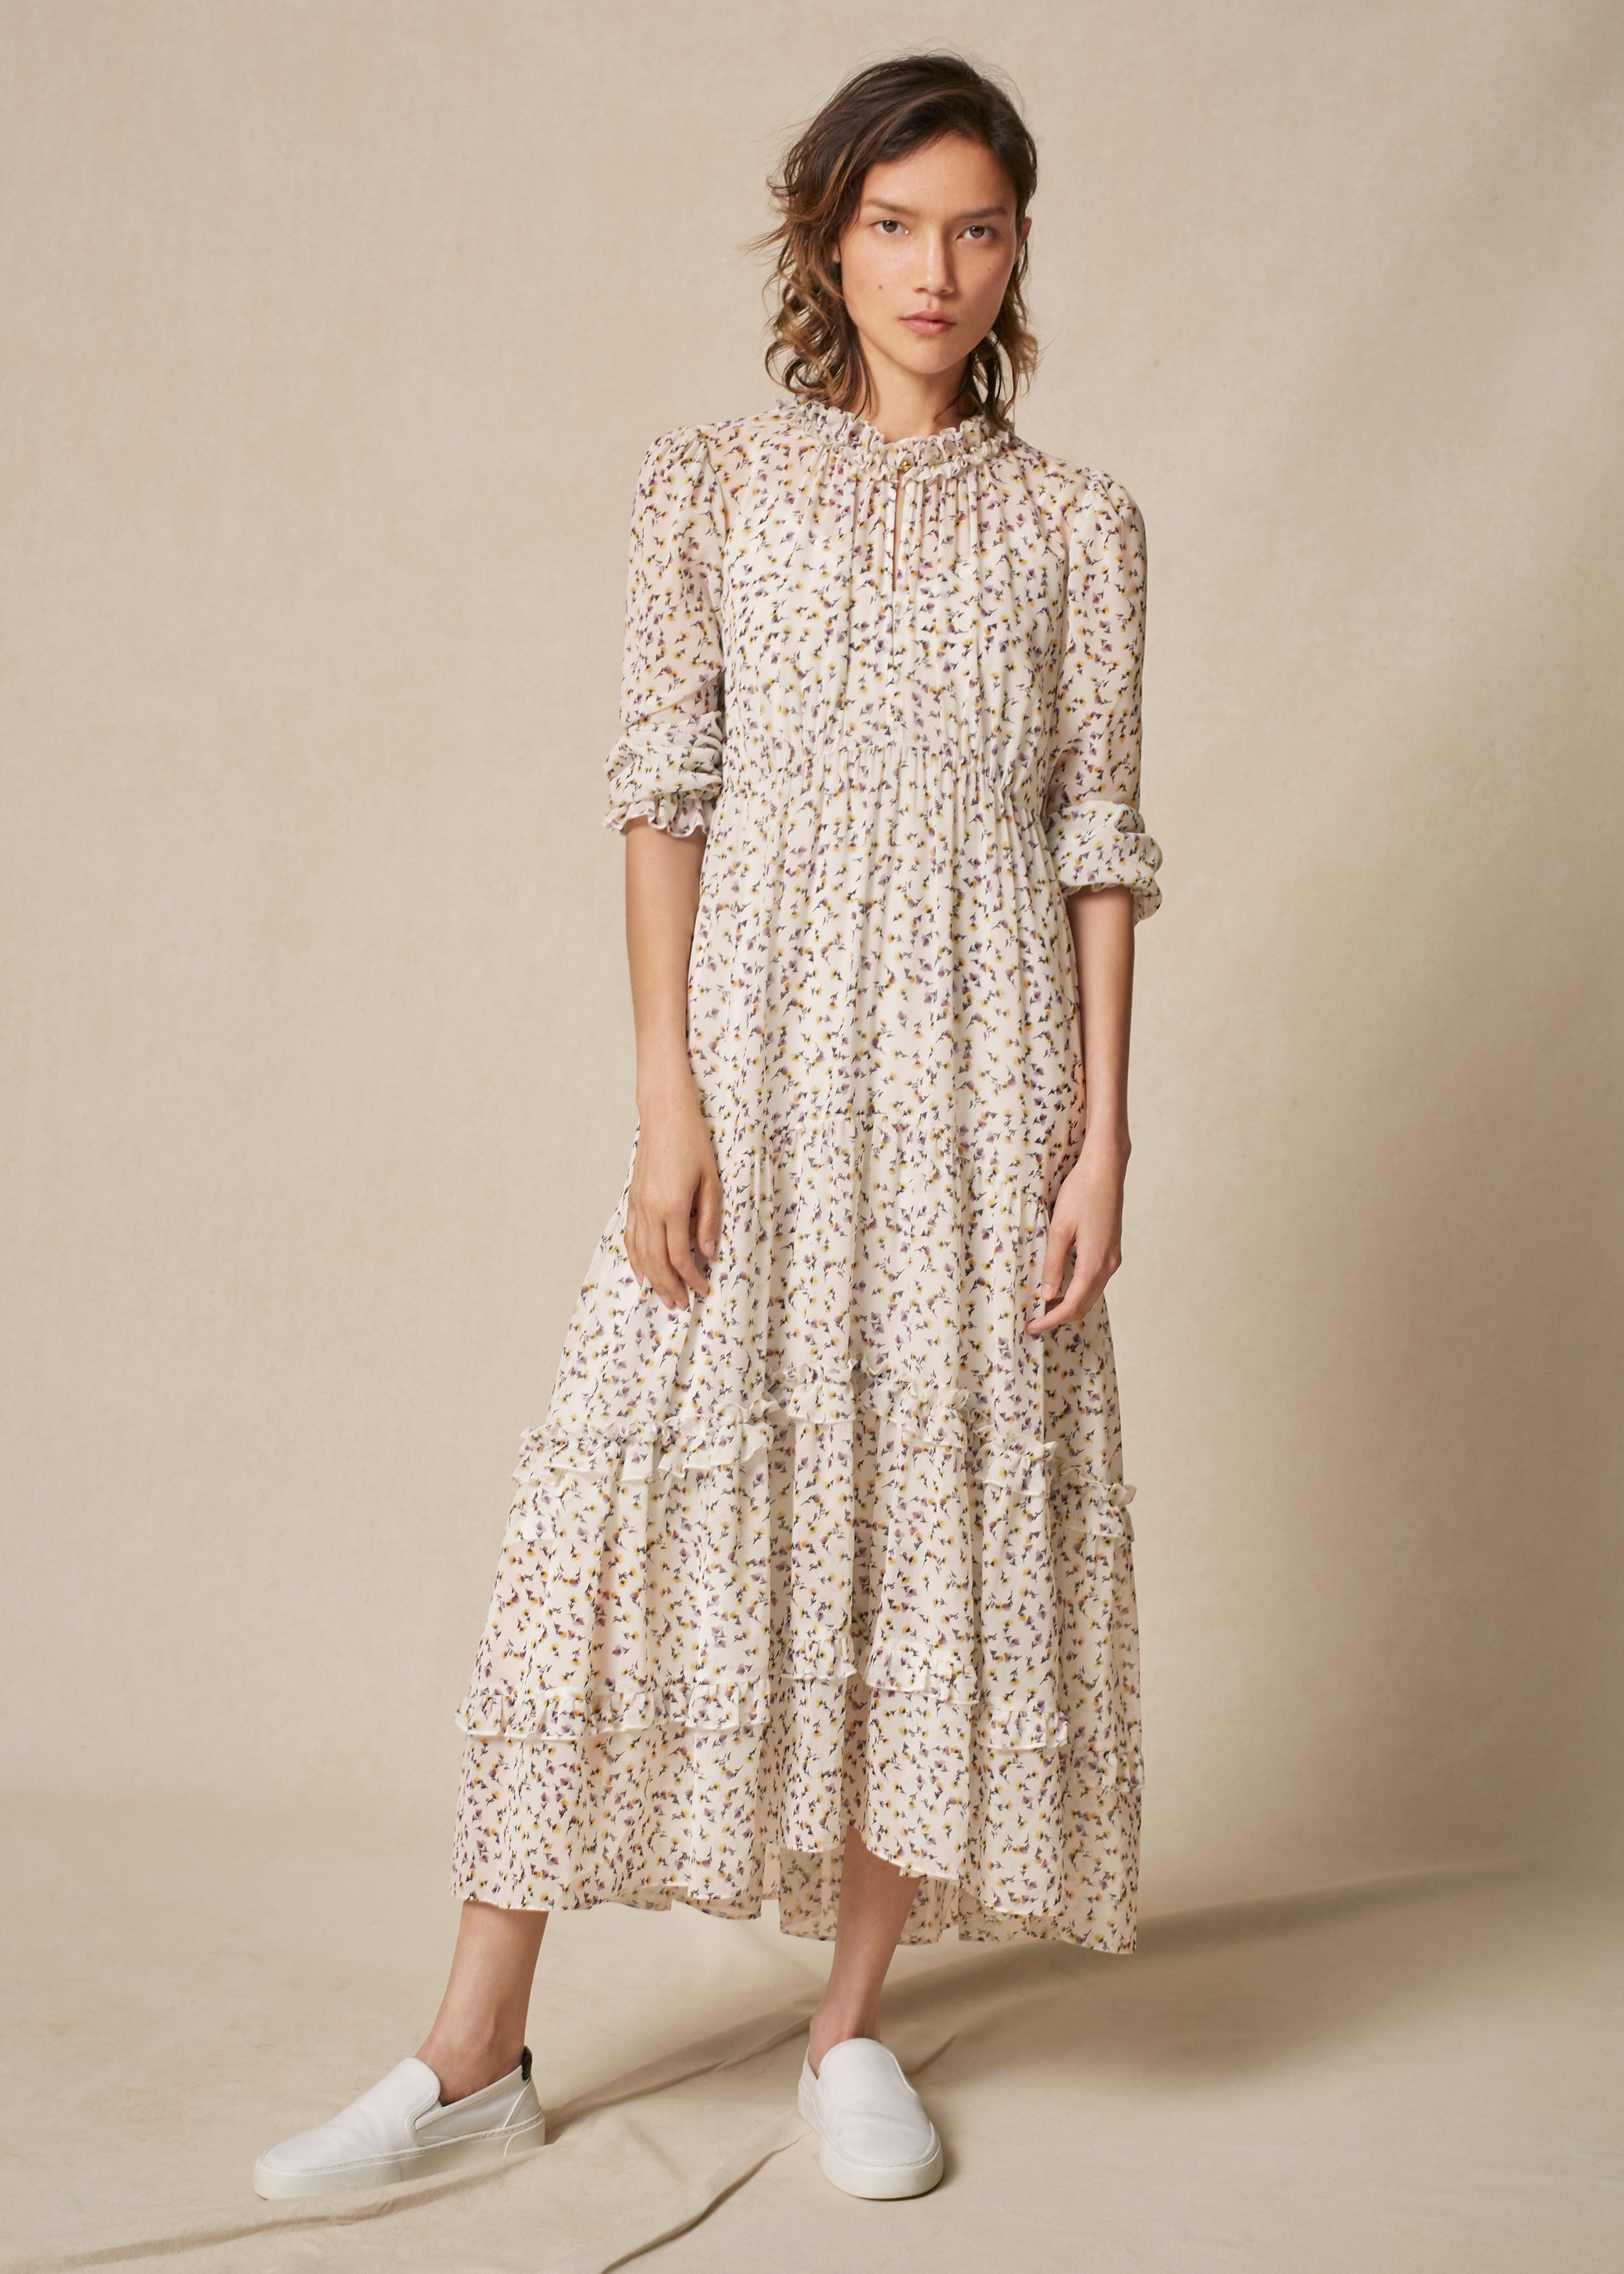 delicate floral embroidered sheer overlay dress